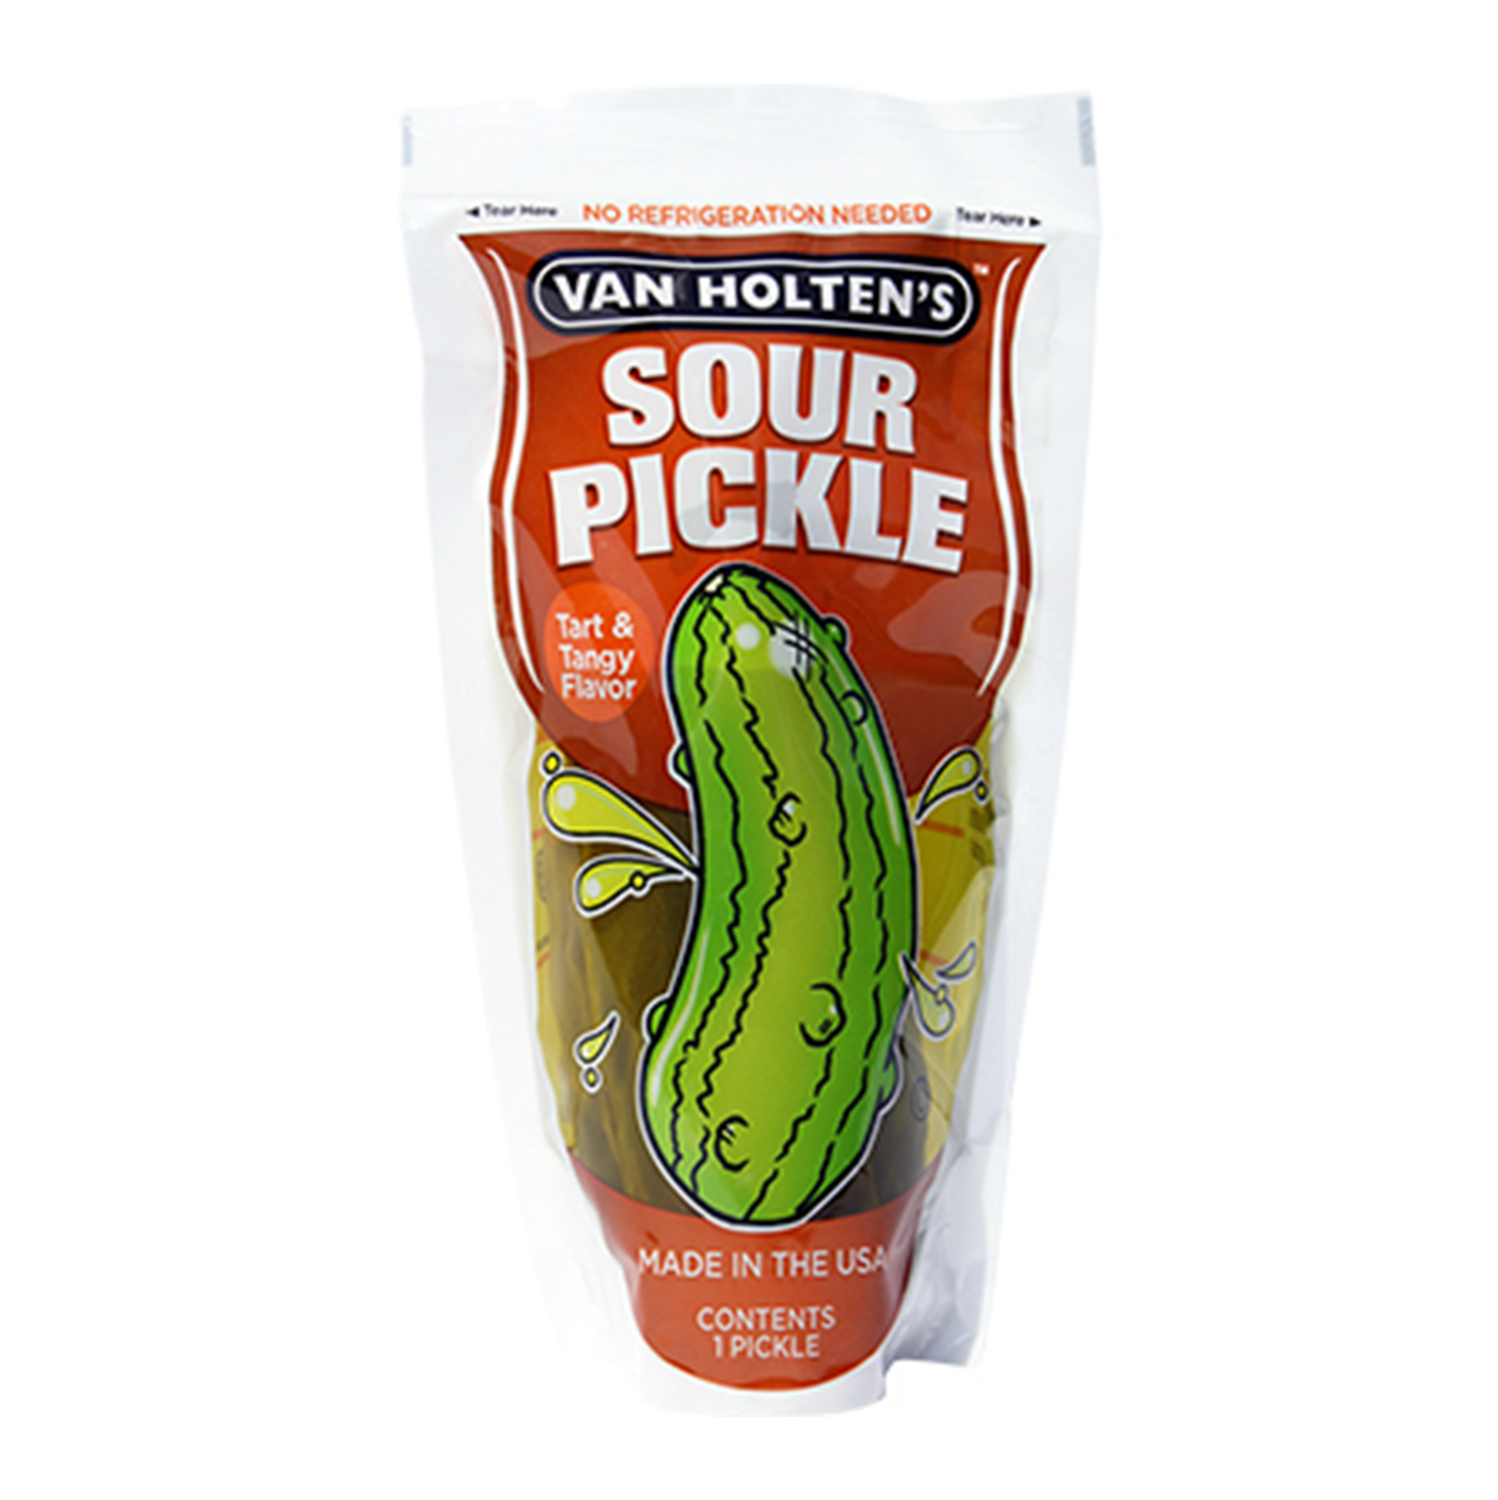 Van Holten's Pickle in a Pouch Large Sour Pickle